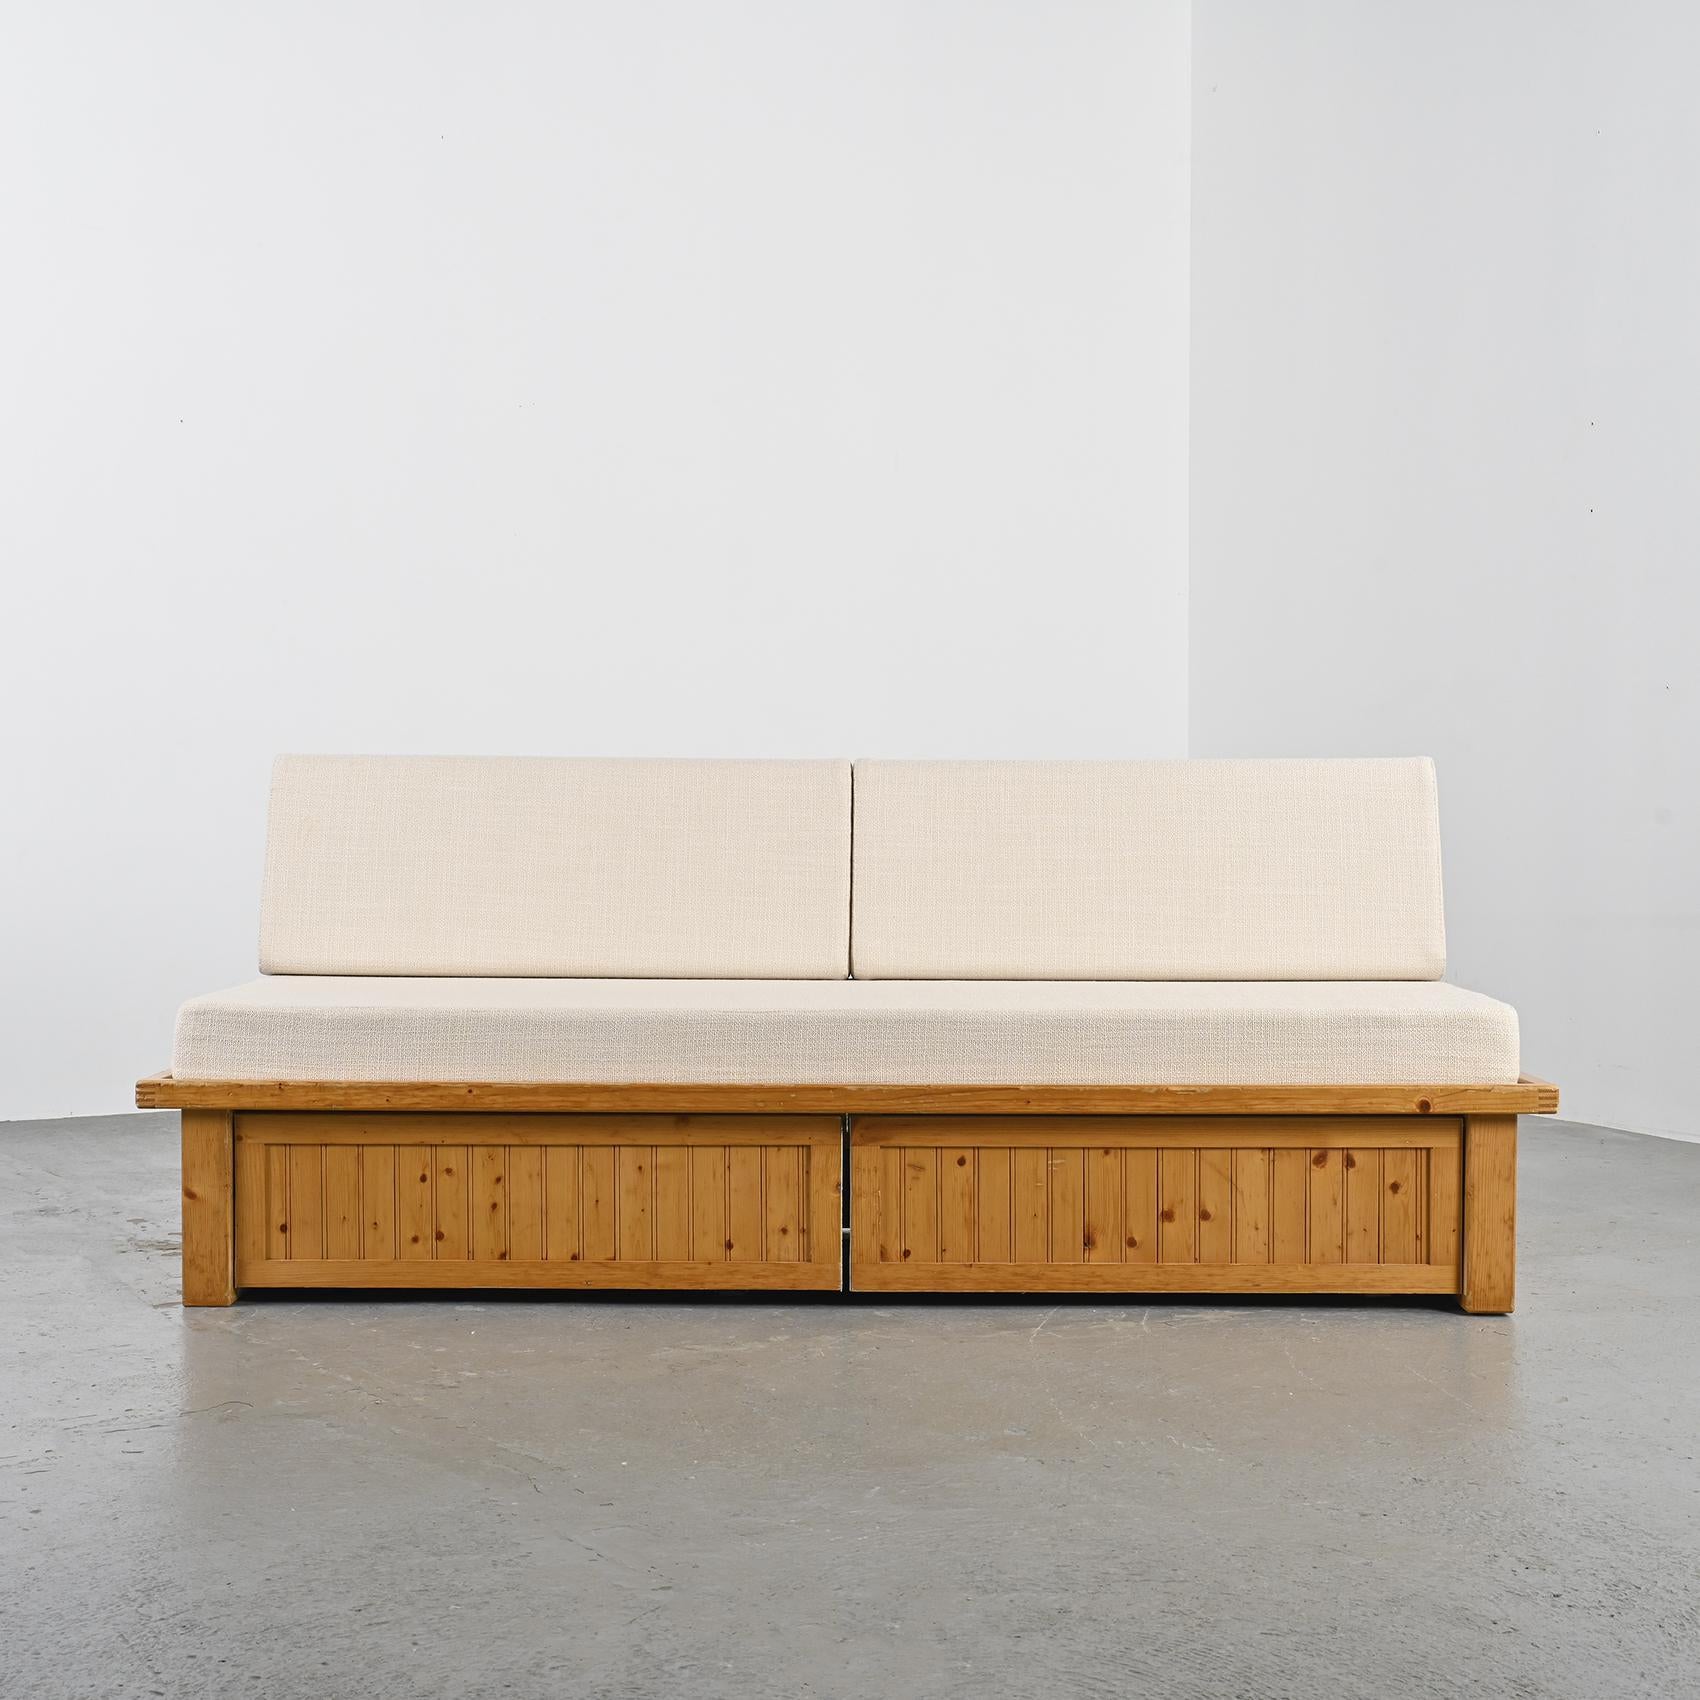 Imagined by Charlotte Perriand, this sofa bed was once part of the furnishings in the apartments of the Residence Nova in Les Arcs.

The structure of this piece is crafted with pine slats and conceals two rolling drawers accessible through a flap.